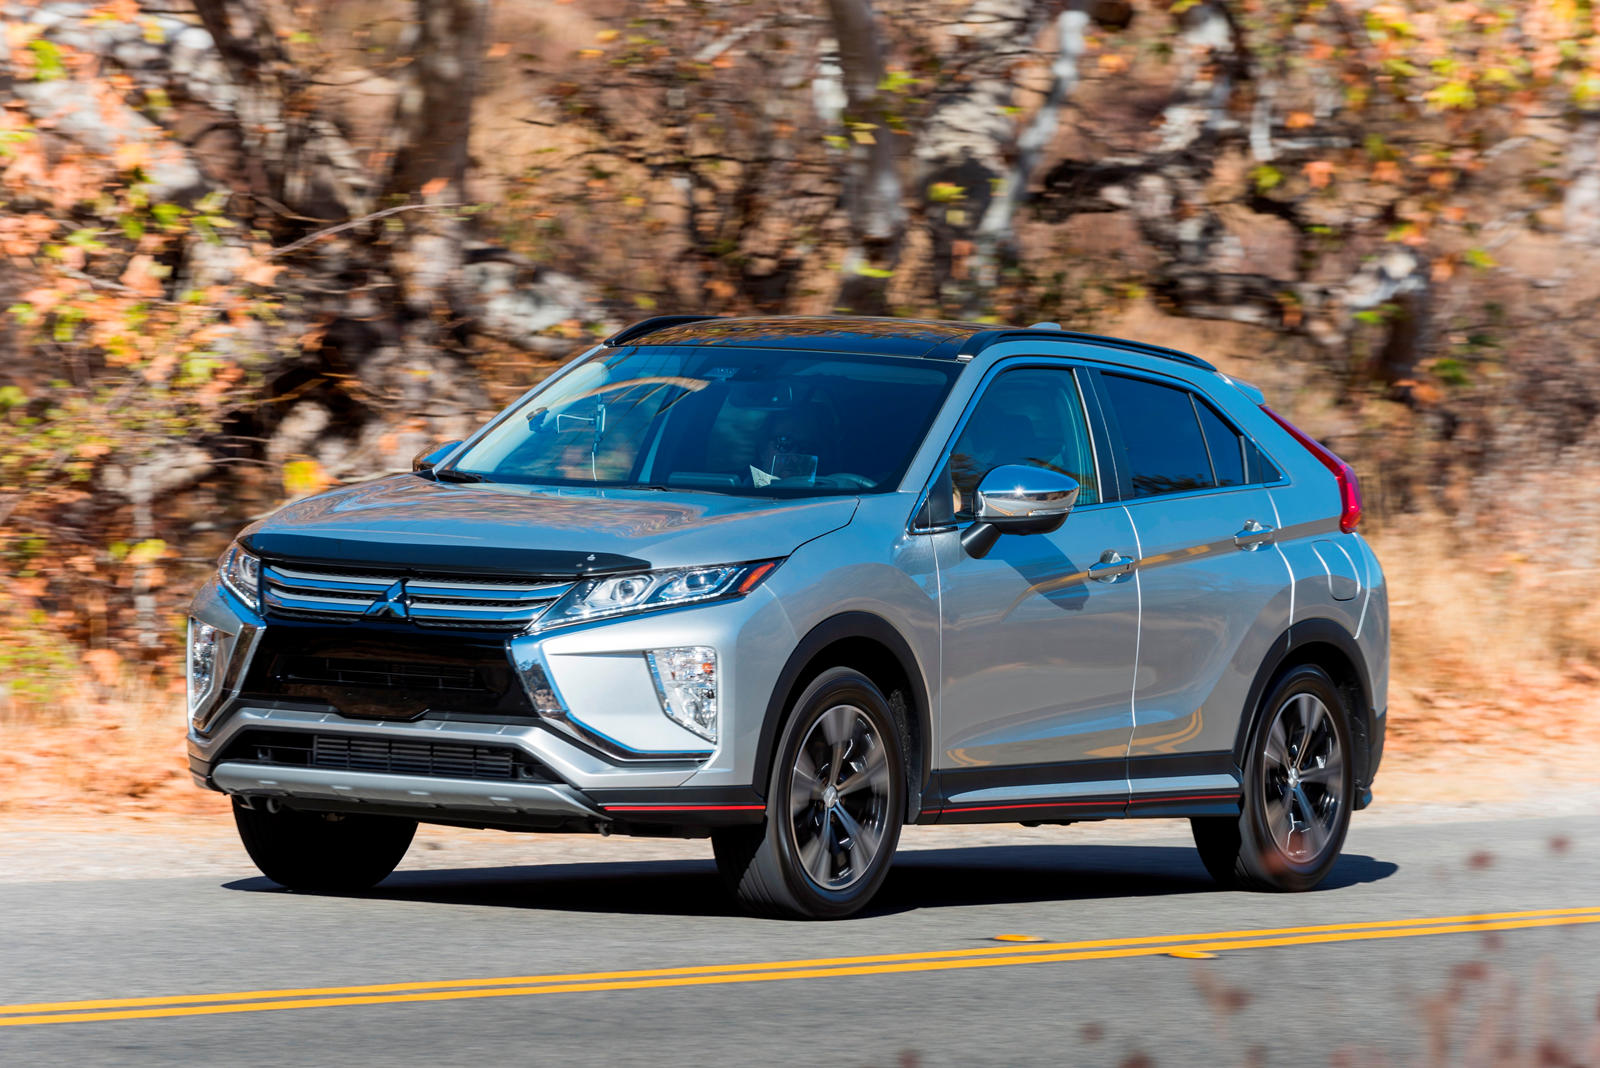 2020 Mitsubishi Eclipse Cross Review | Eclipse Cross SUV Models | CarBuzz